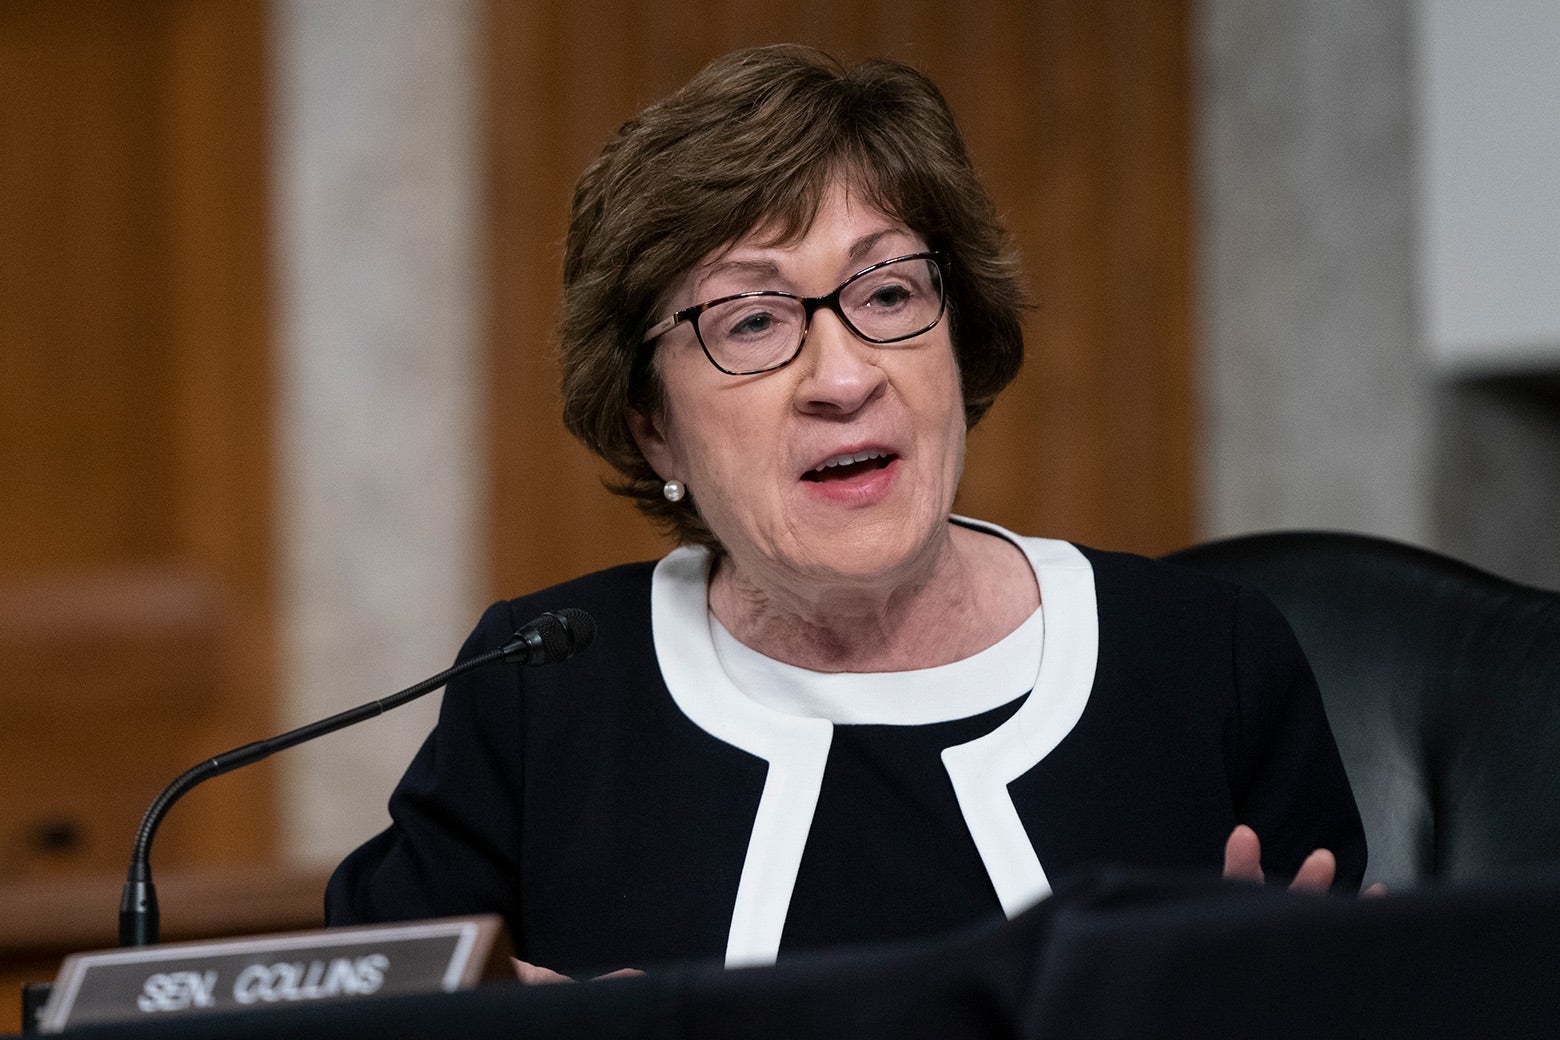 Susan Collins sits at a desk and speaks into a microphone.